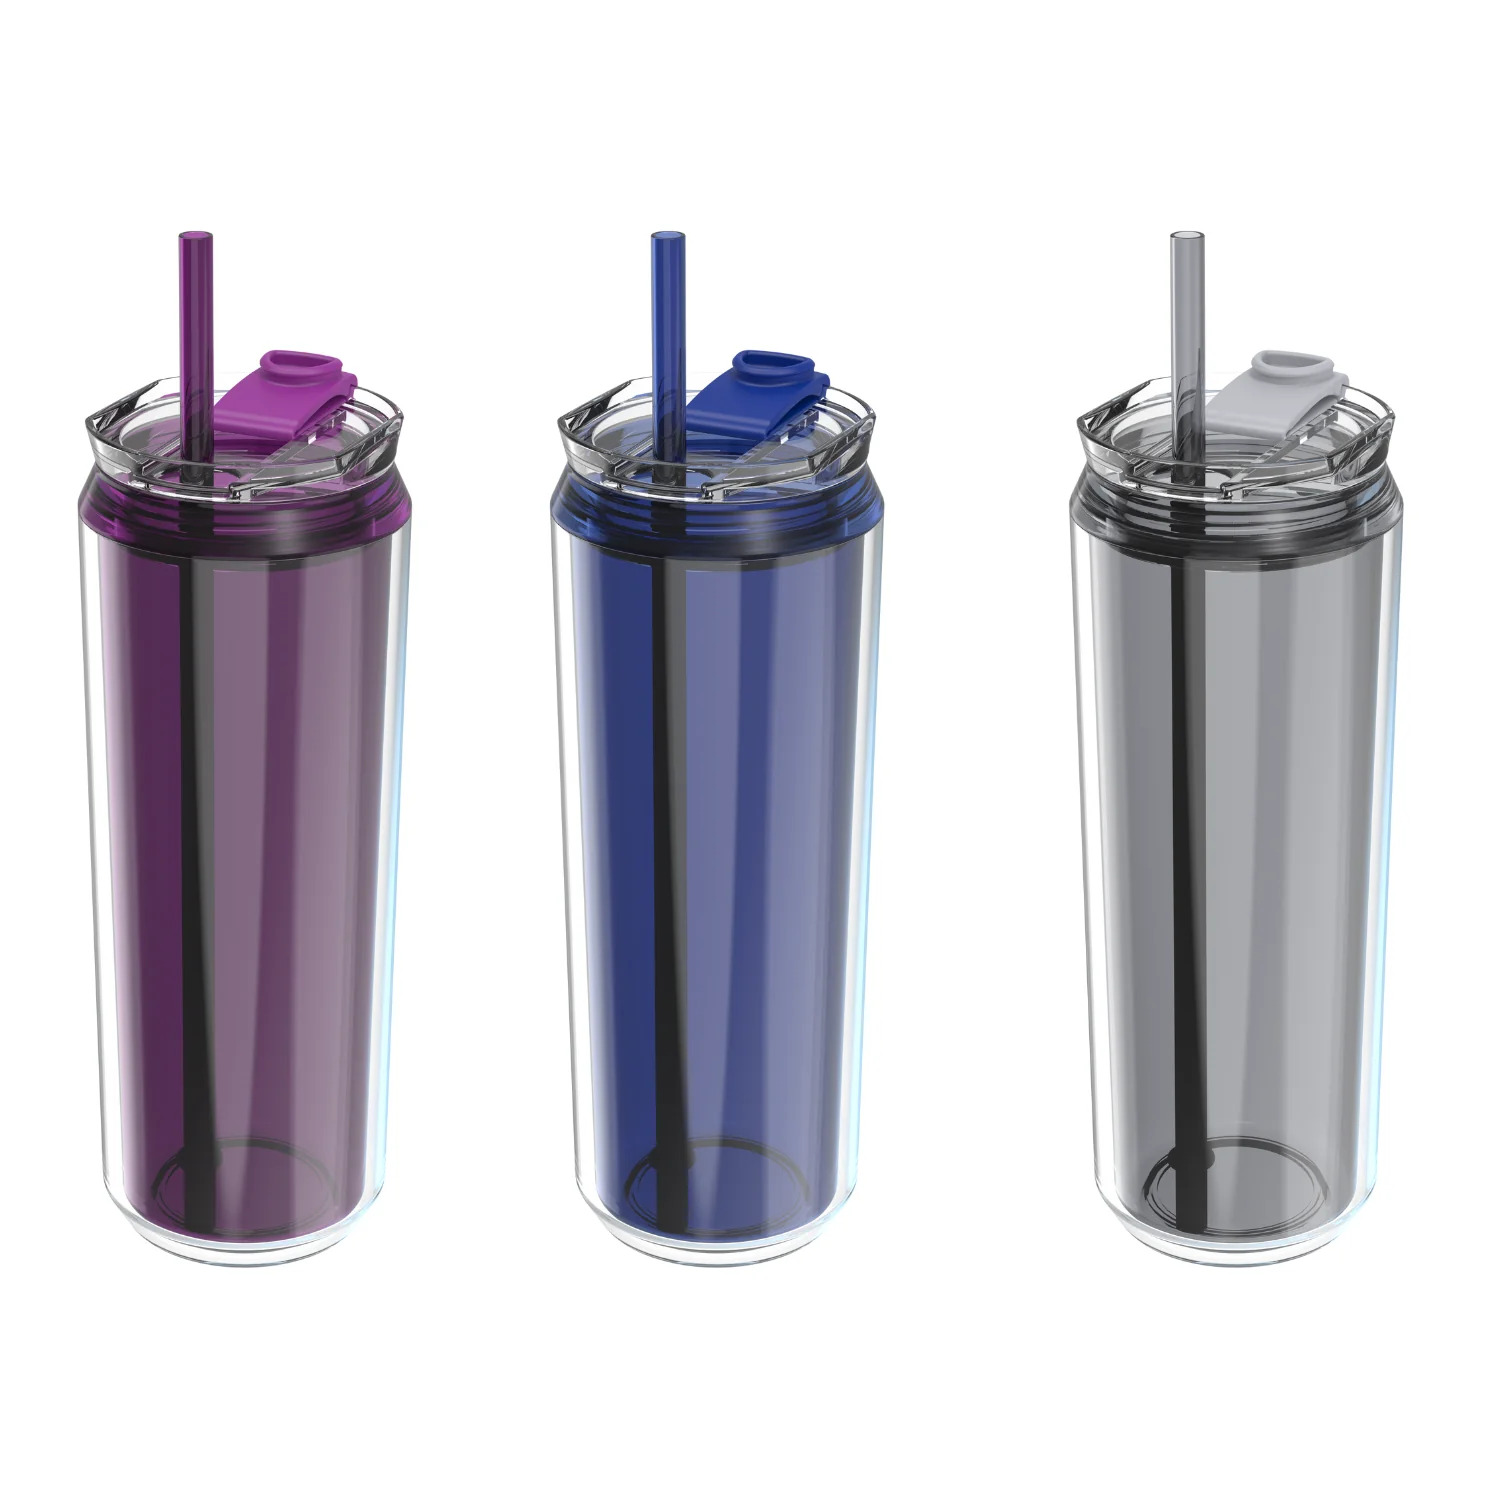 Cool Gear 3-Pack Modern Tumbler with Reusable Straw | Dishwasher Safe, Cup Holder Friendly, Spillproof, Double-Wall Insulated Travel Tumbler | Solid Variety Pack - image 1 of 4